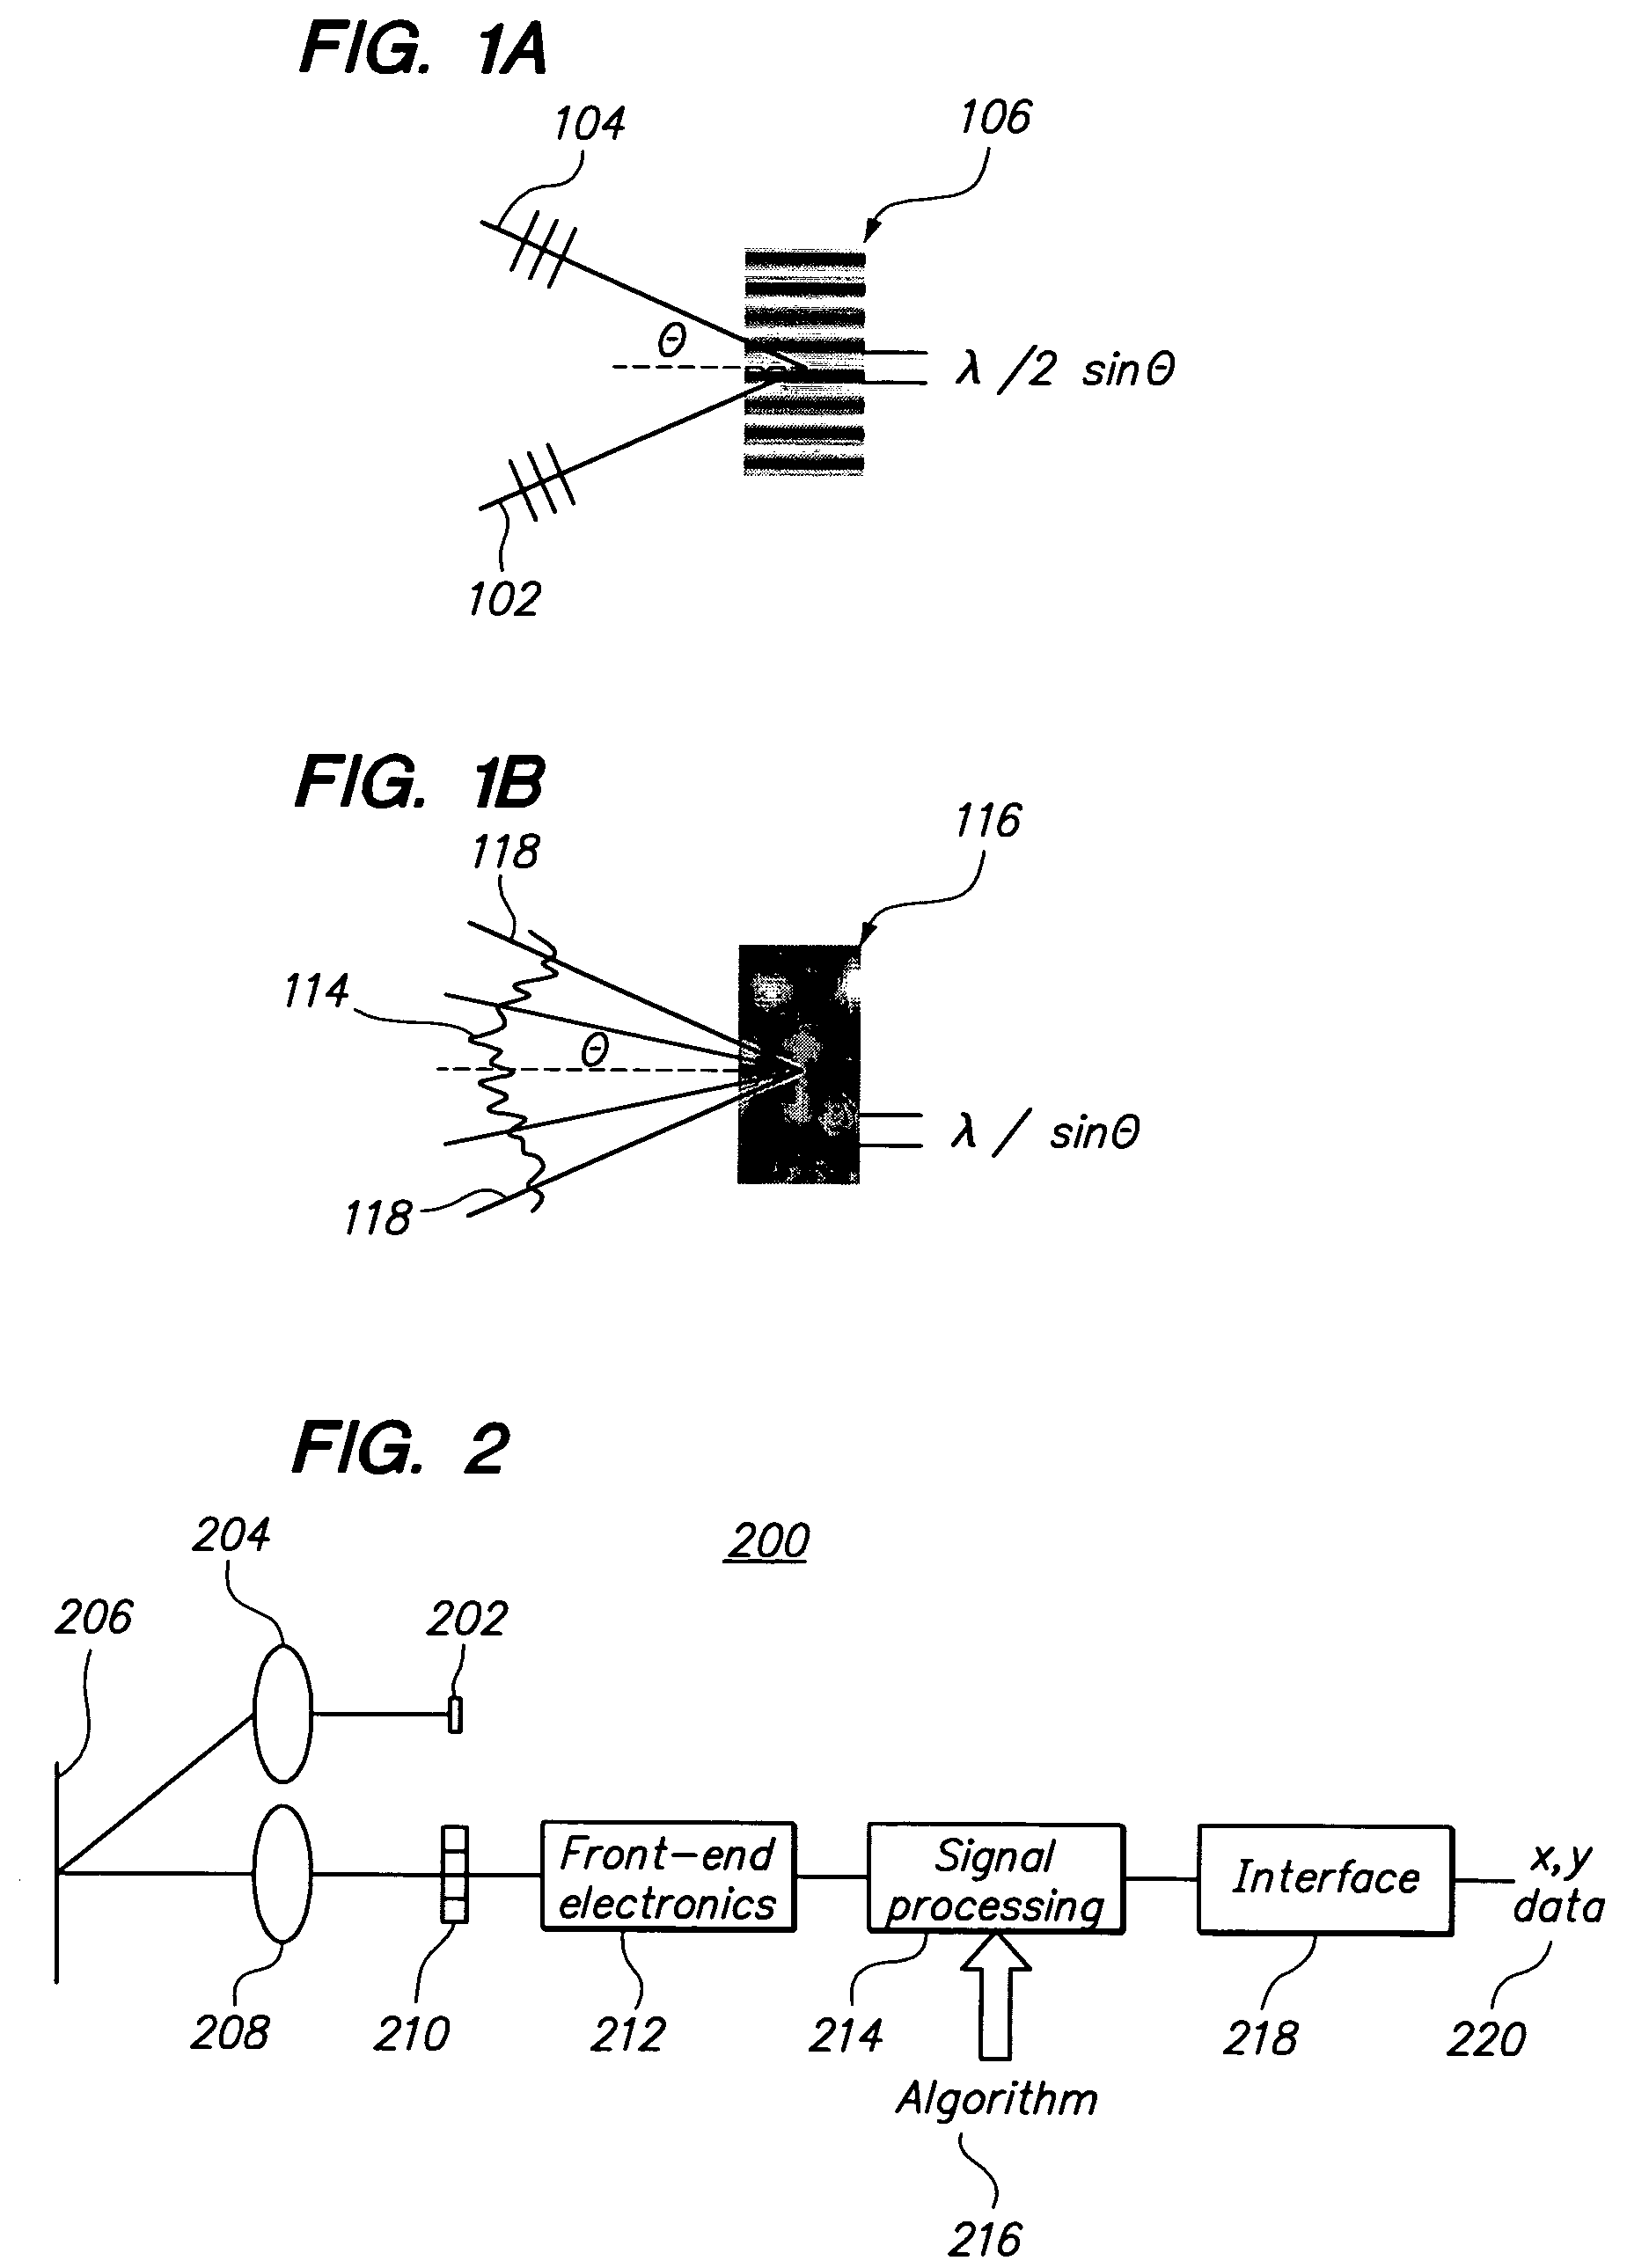 Optical position sensing device including interlaced groups of photosensitive elements